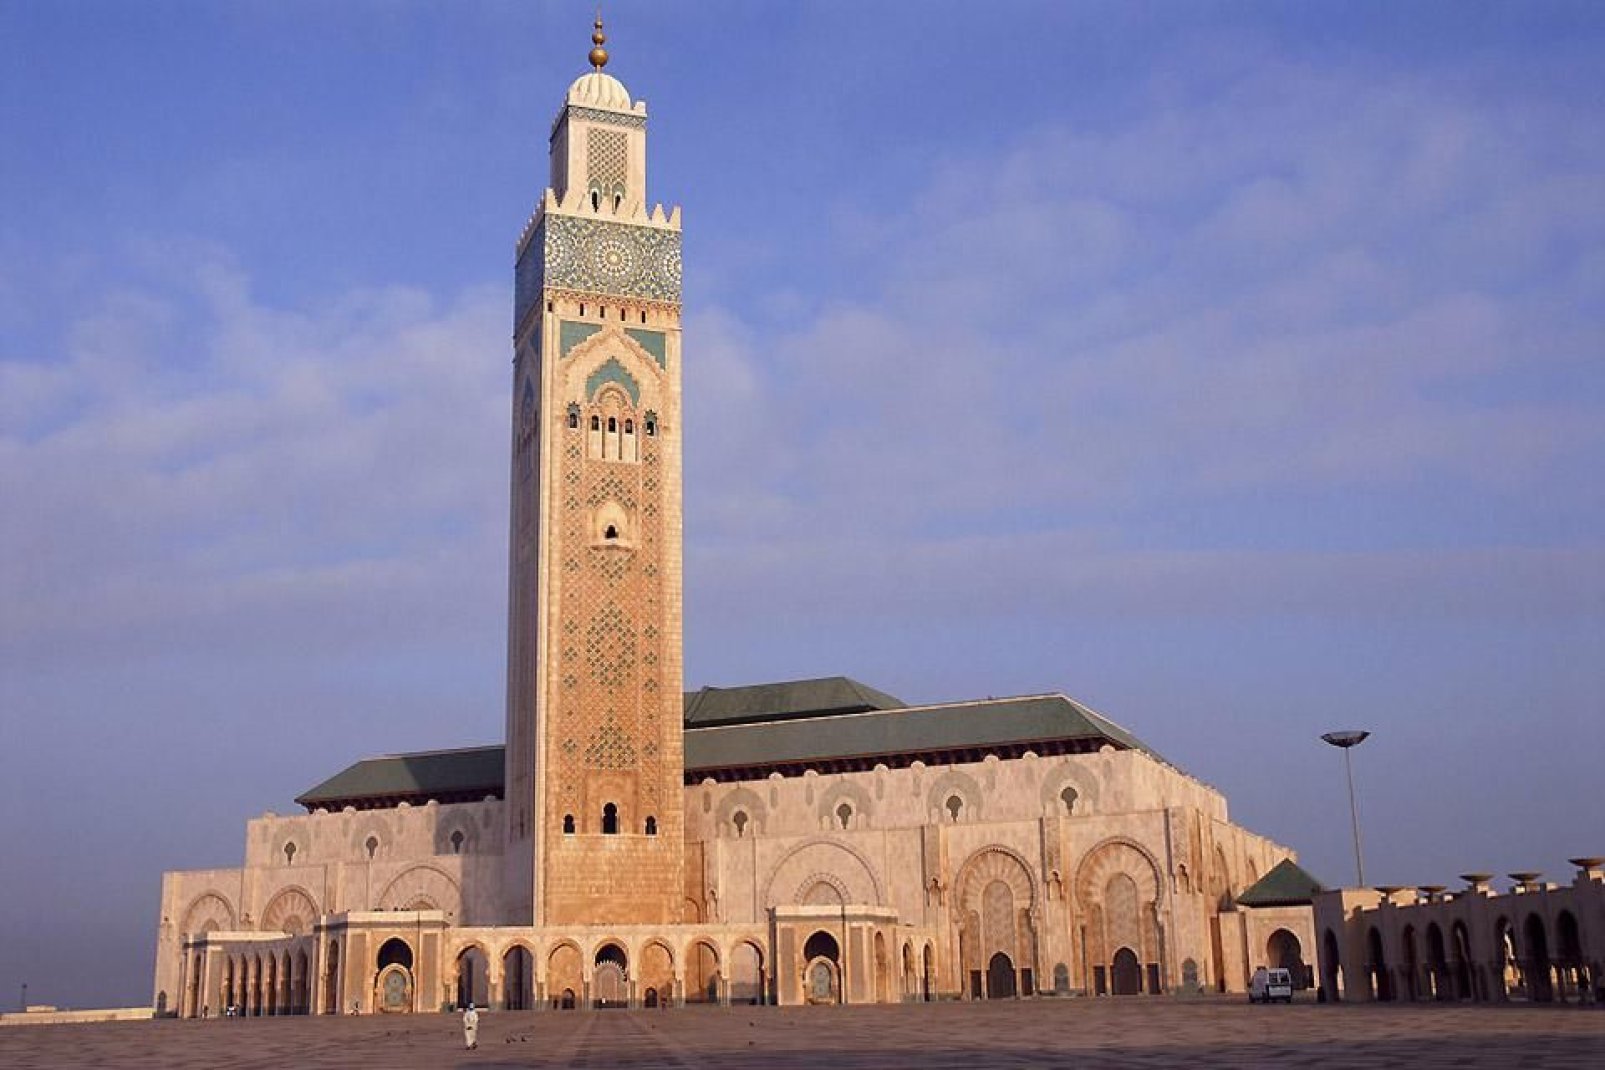 The Hassan II mosque, the largest mosque in Morocco and the 5th largest in the world, is built right on the sea.